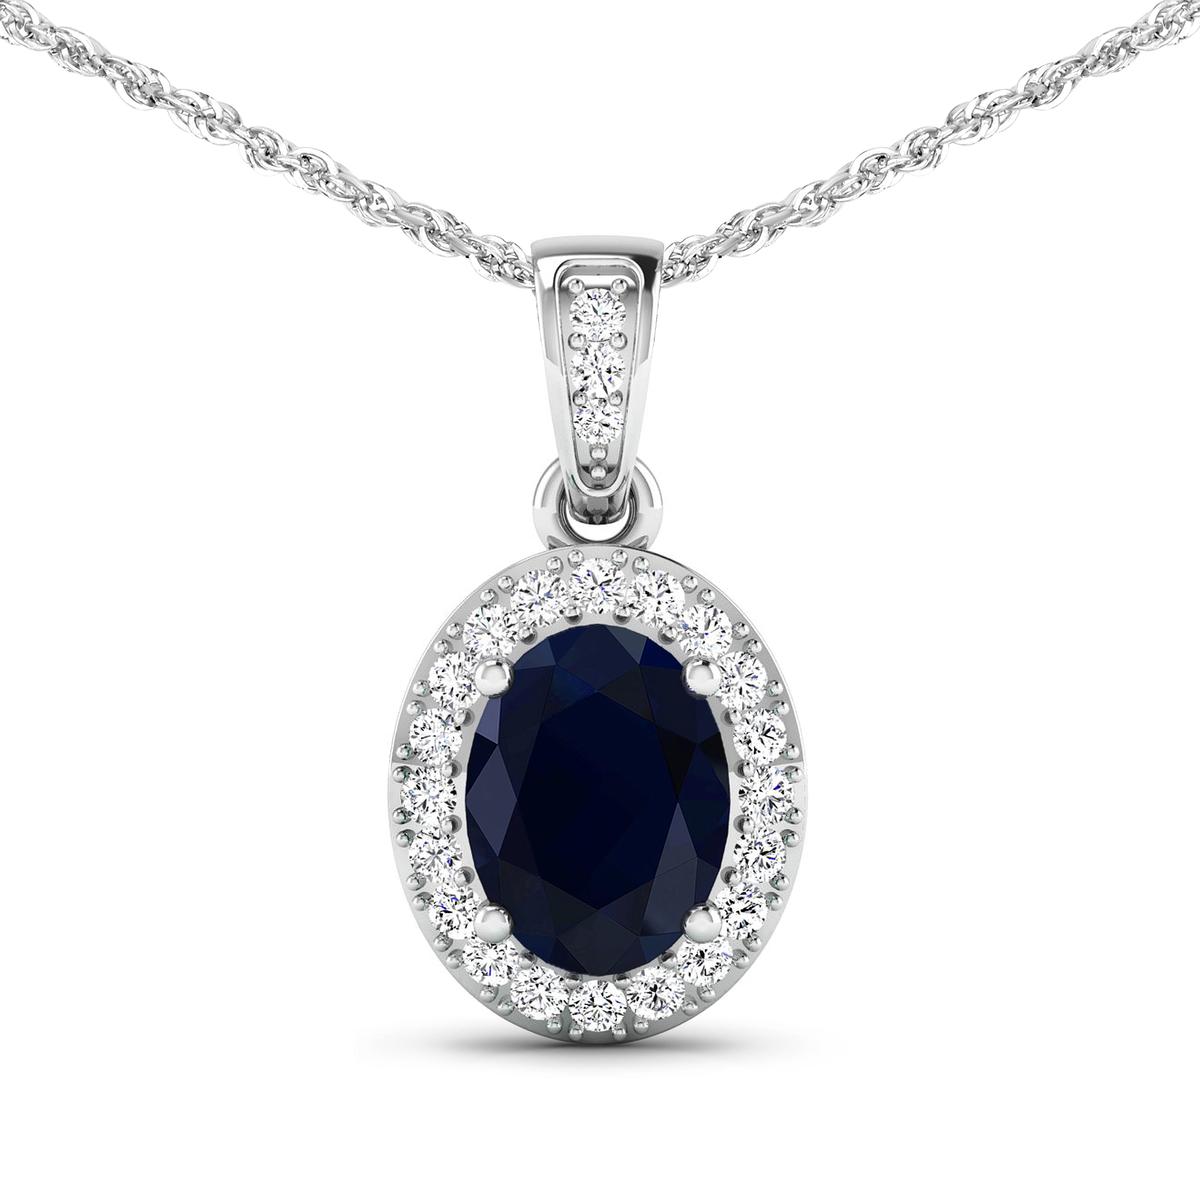 14KT White Gold 1.30ct Blue Sapphire and Diamond Pendant with Chain